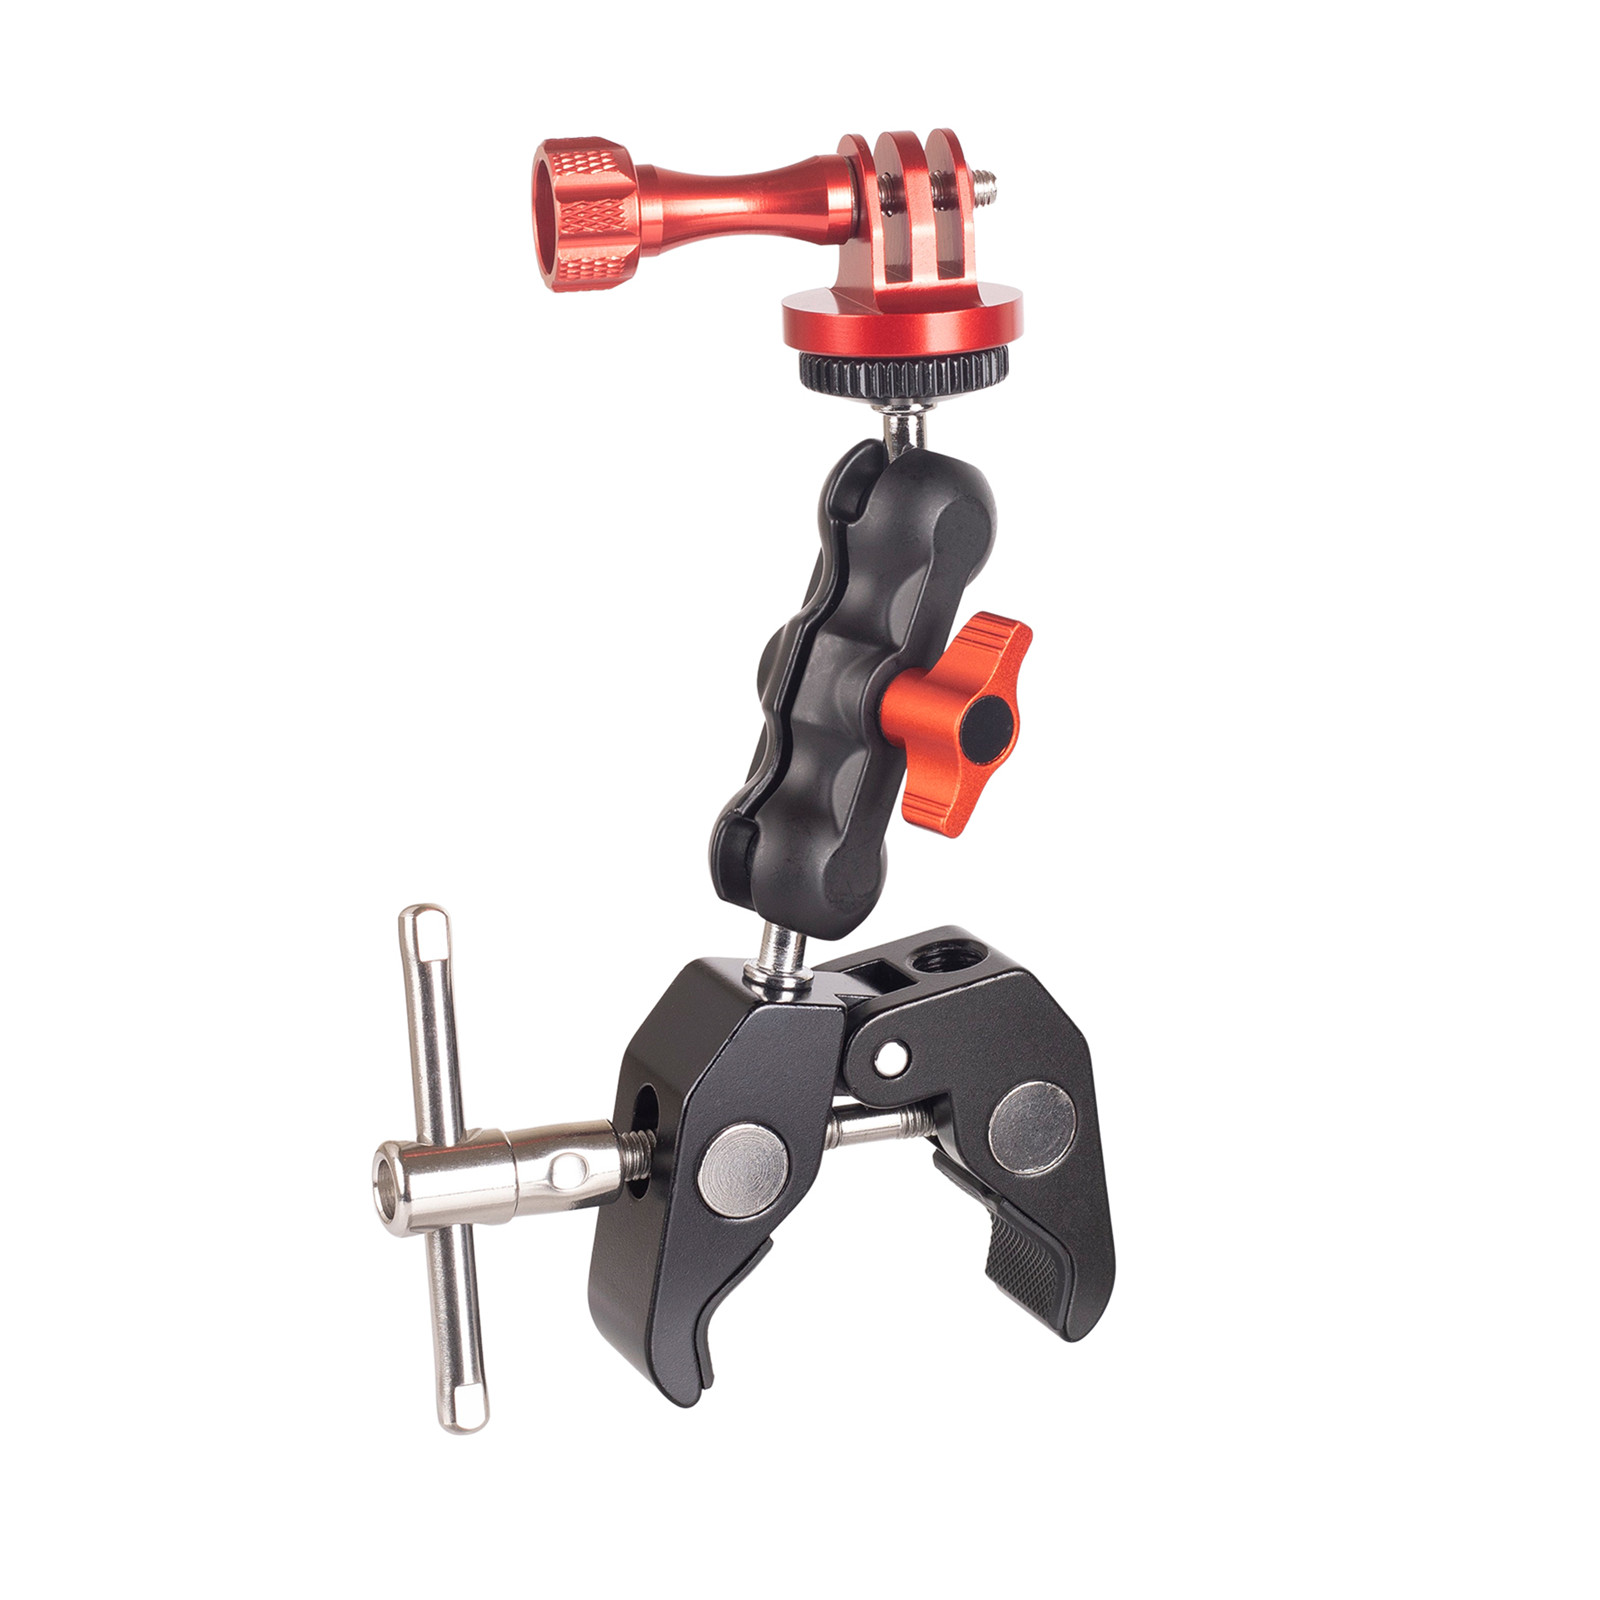 MOSHUSO Camera Super Clamp Mount for Gopro, Red